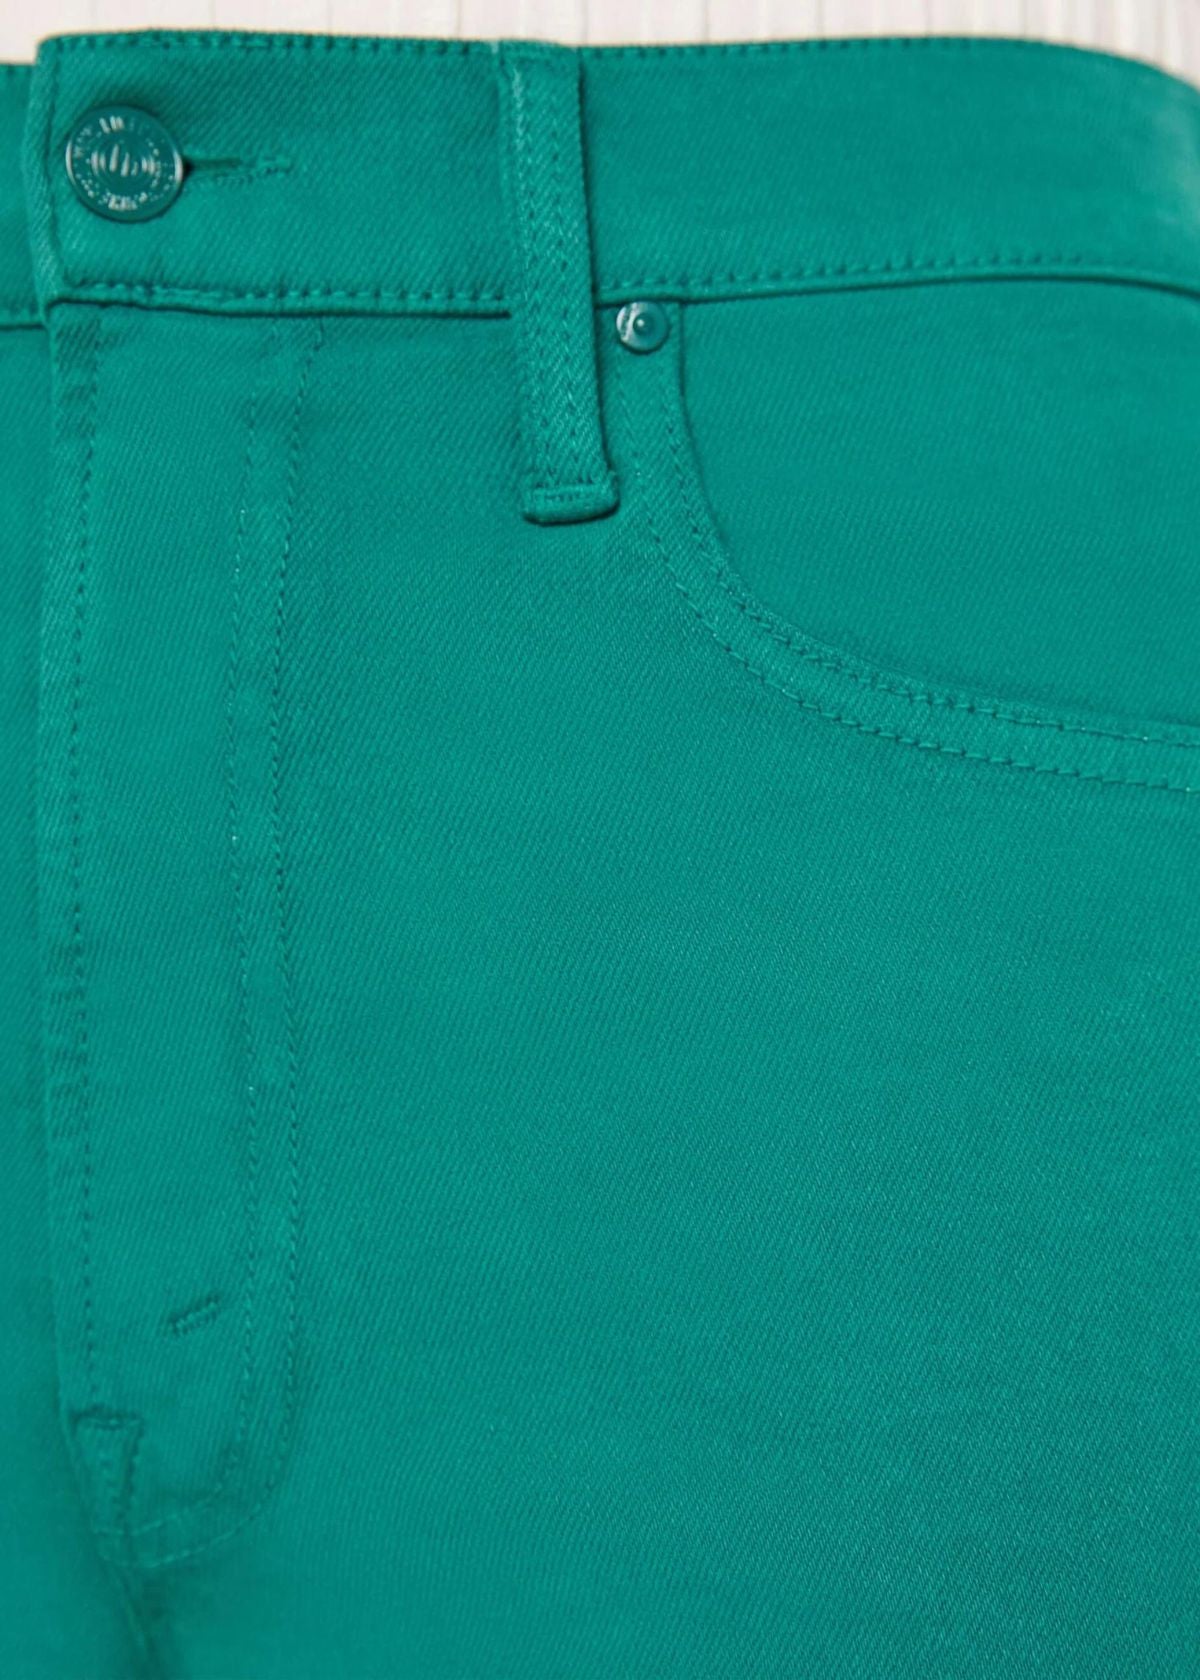 MOTHER The Rambler Zip Ankle Jean - Teal Green